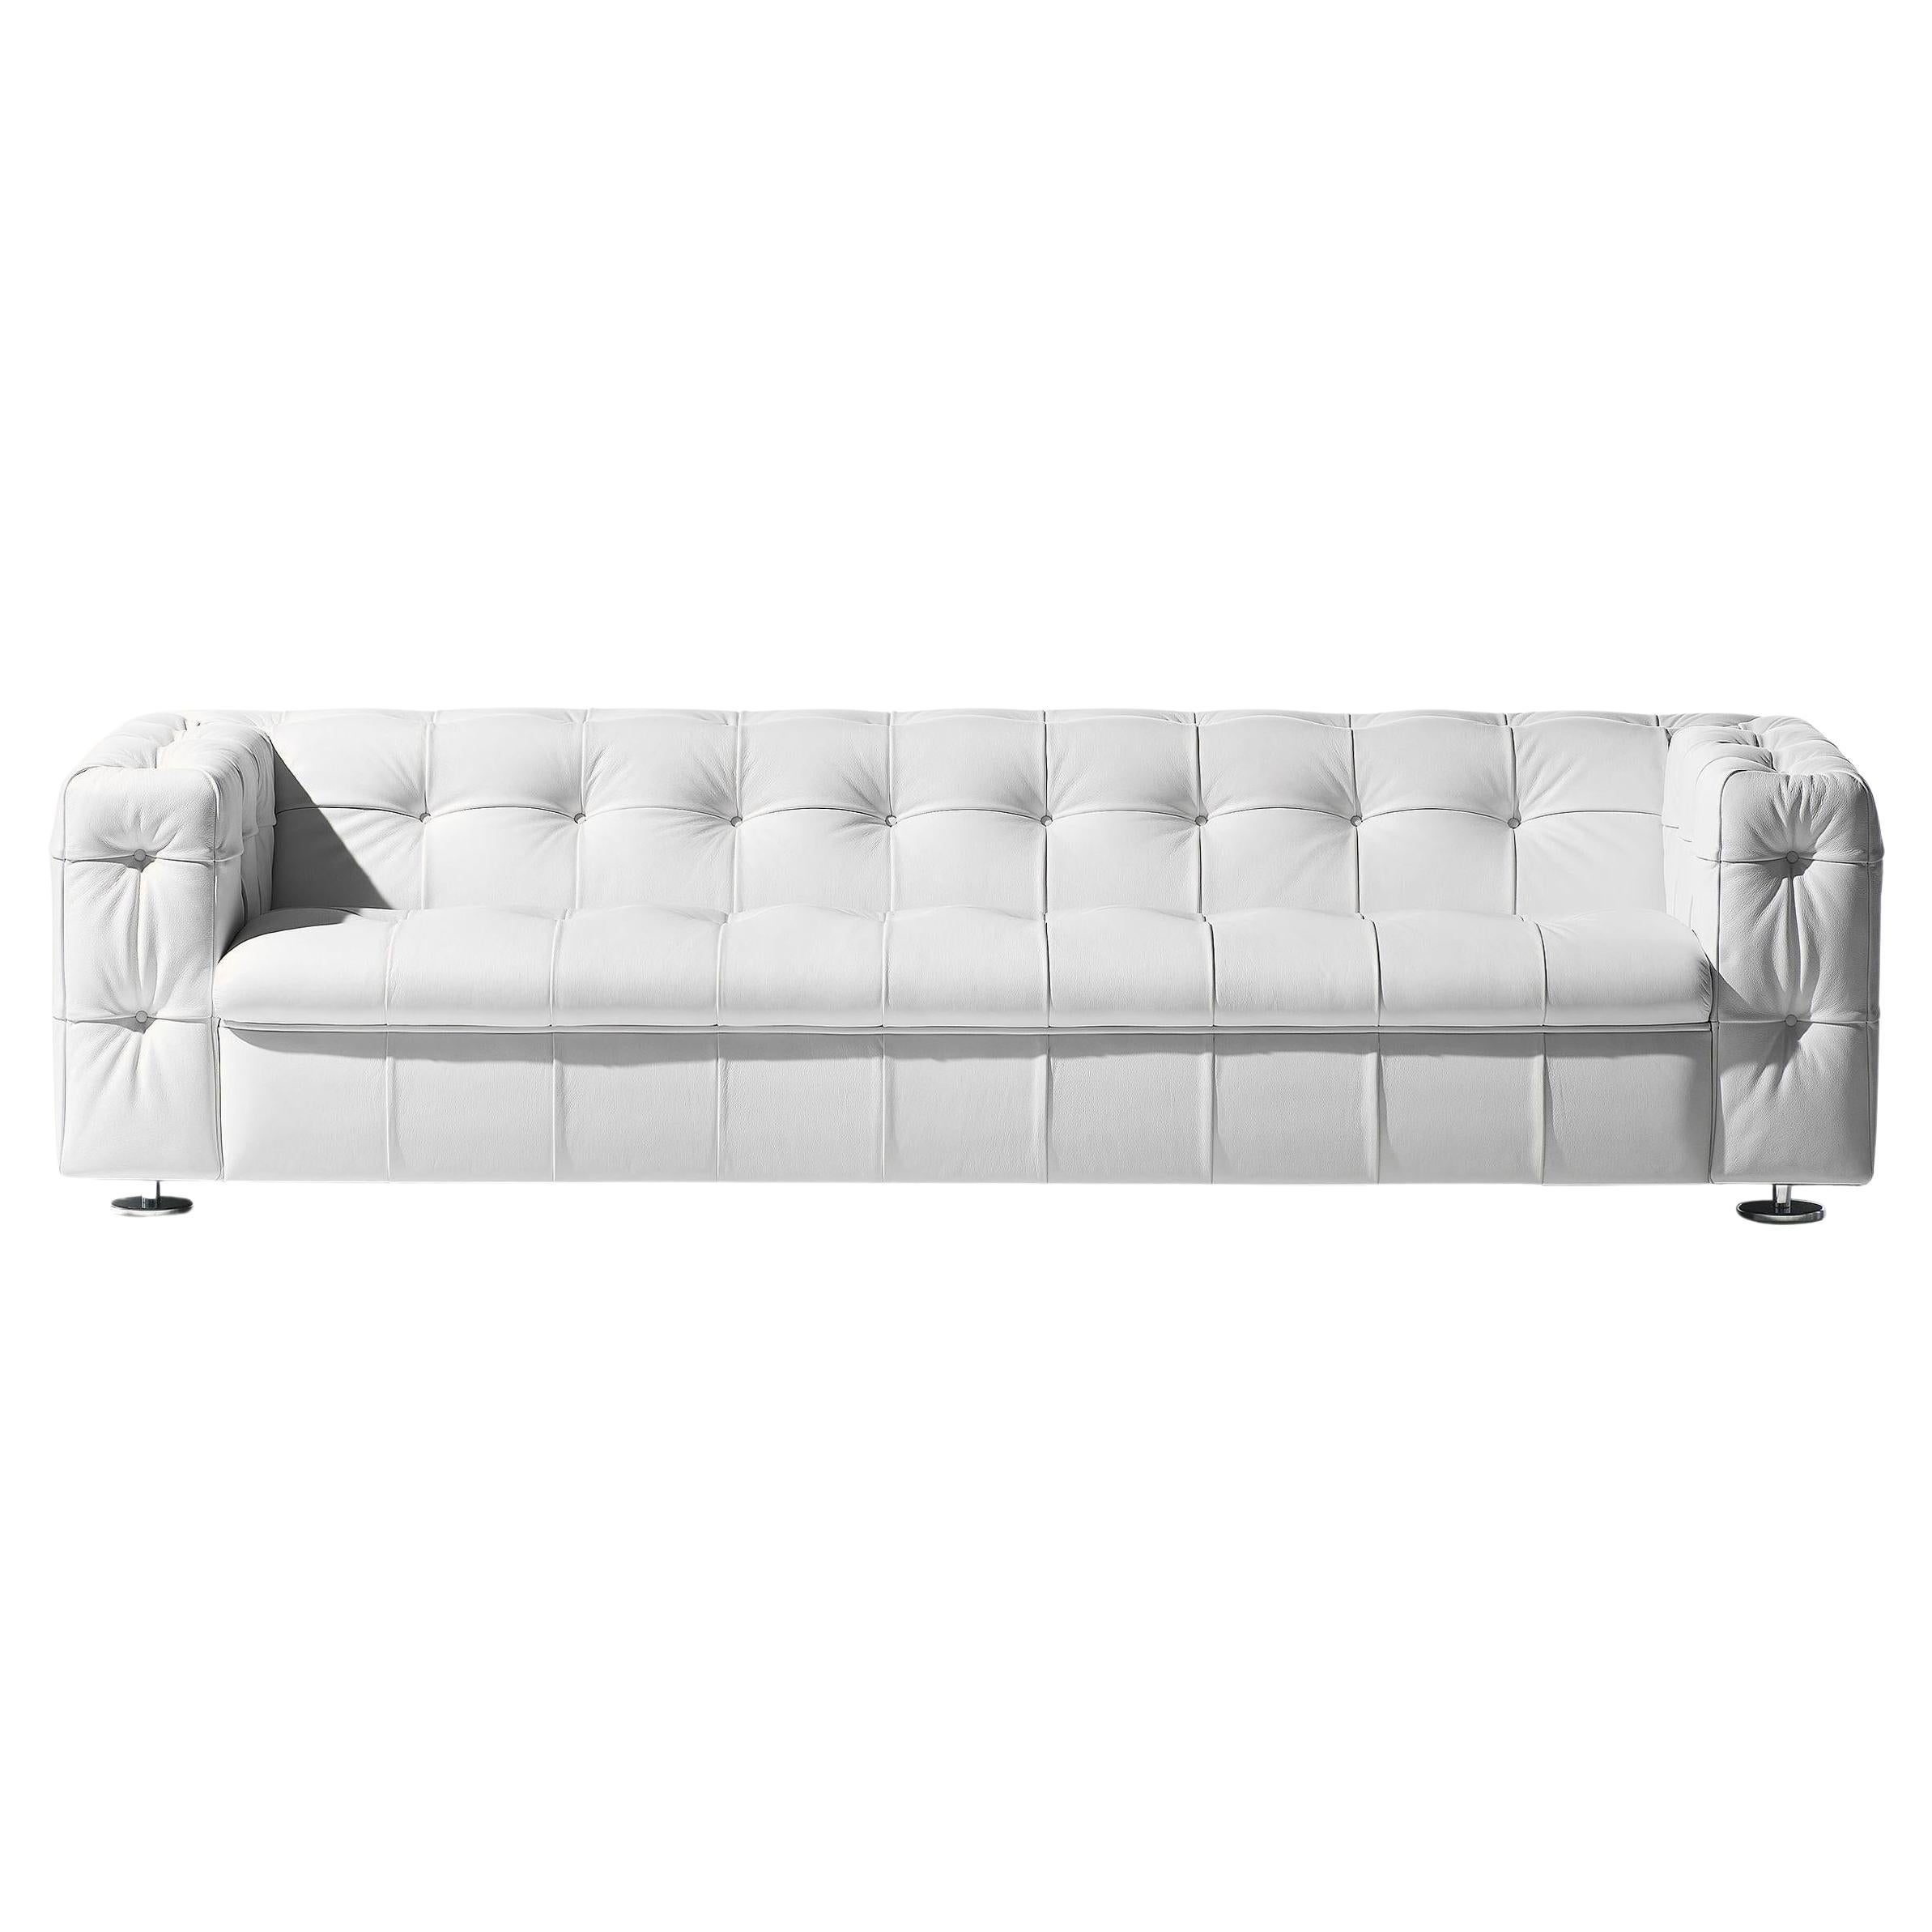 De Sede RH-306 Three-Seat Sofa in Snow Upholstery by Robert Haussmann For Sale